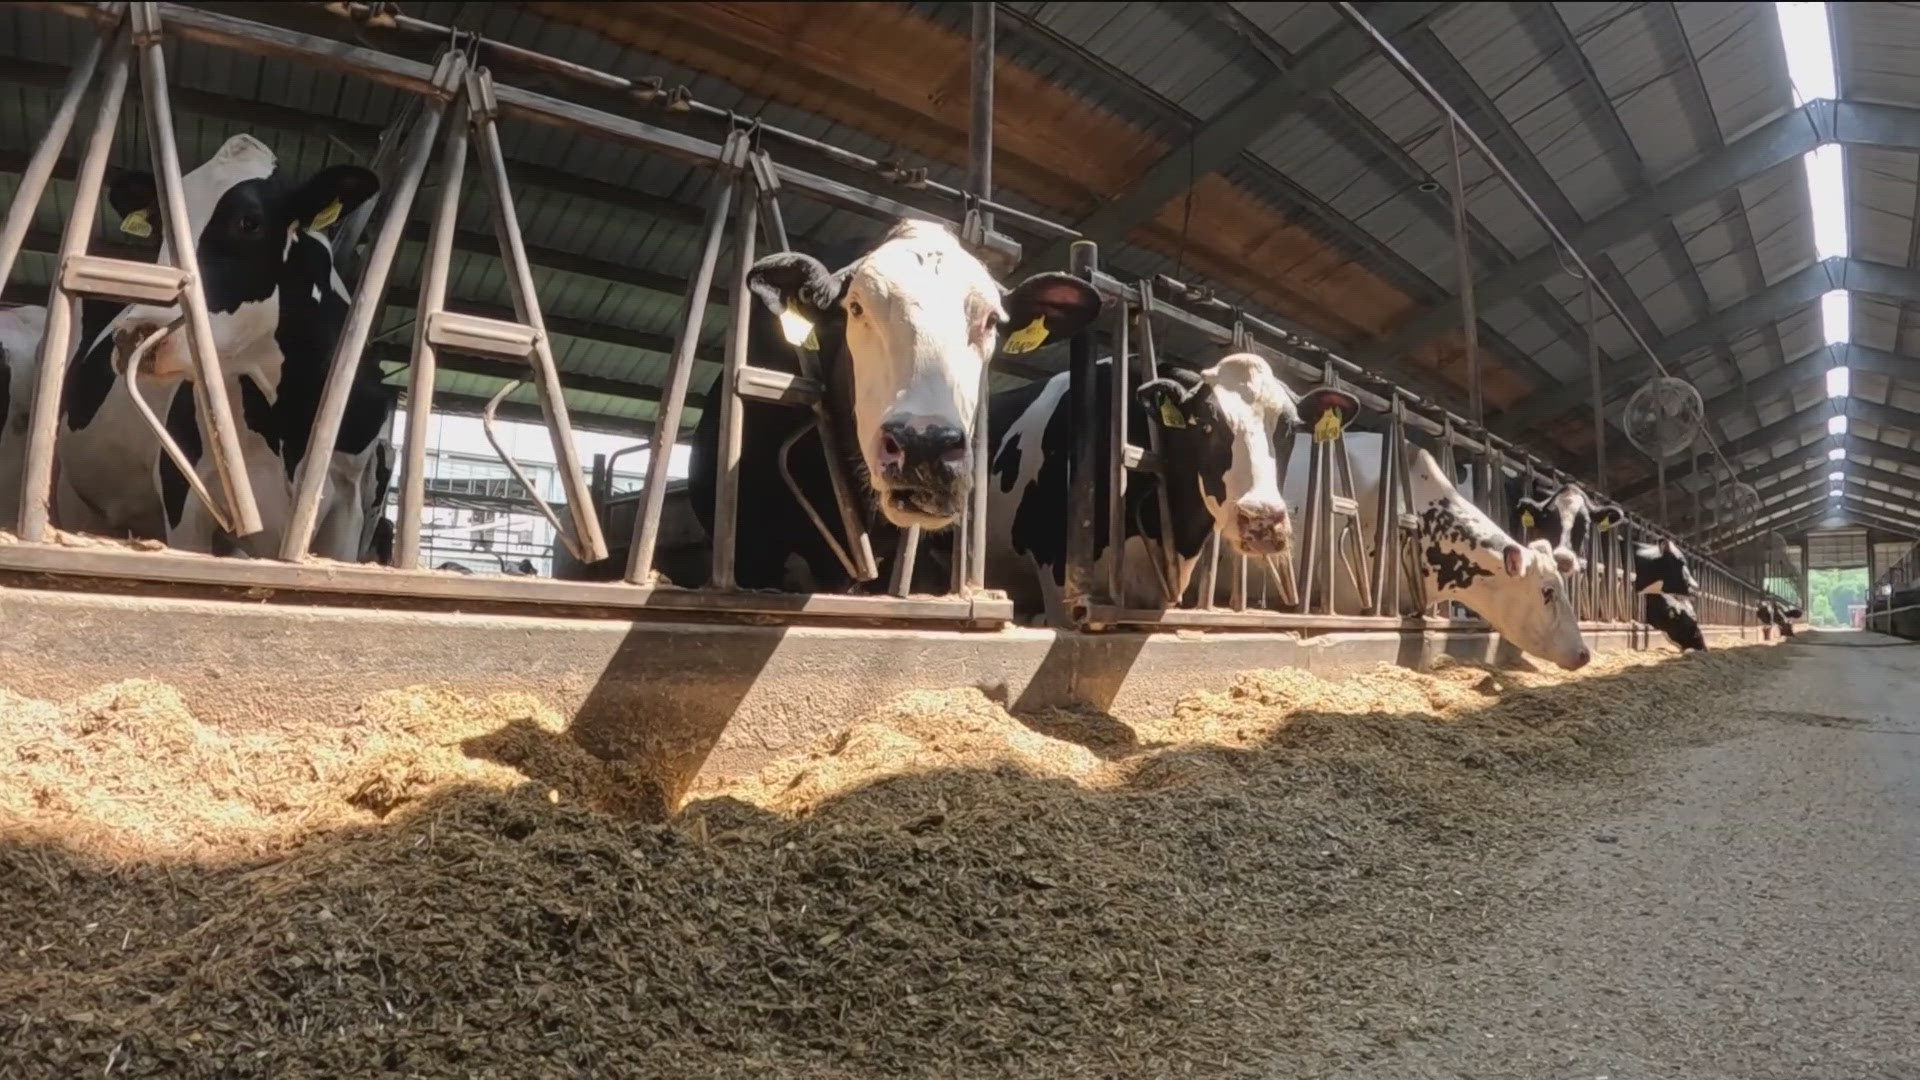 Cows can experience heat stress quickly. When that happens, the cows are less likely to produce milk. Here's a look at how a dairy farm is weathering the heat wave.